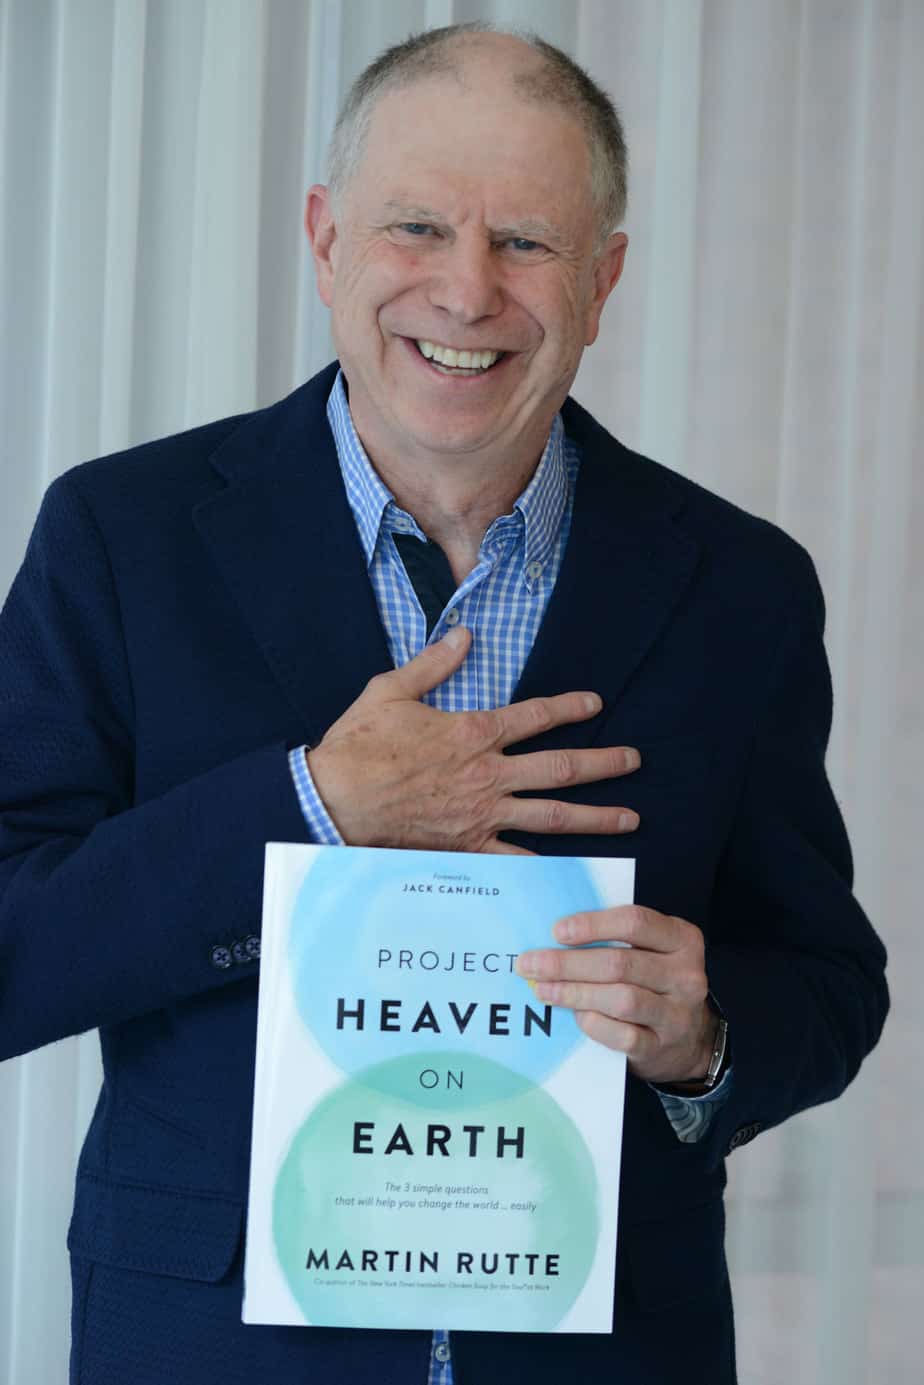 Martin Rutte author of Project Heaven on Earth